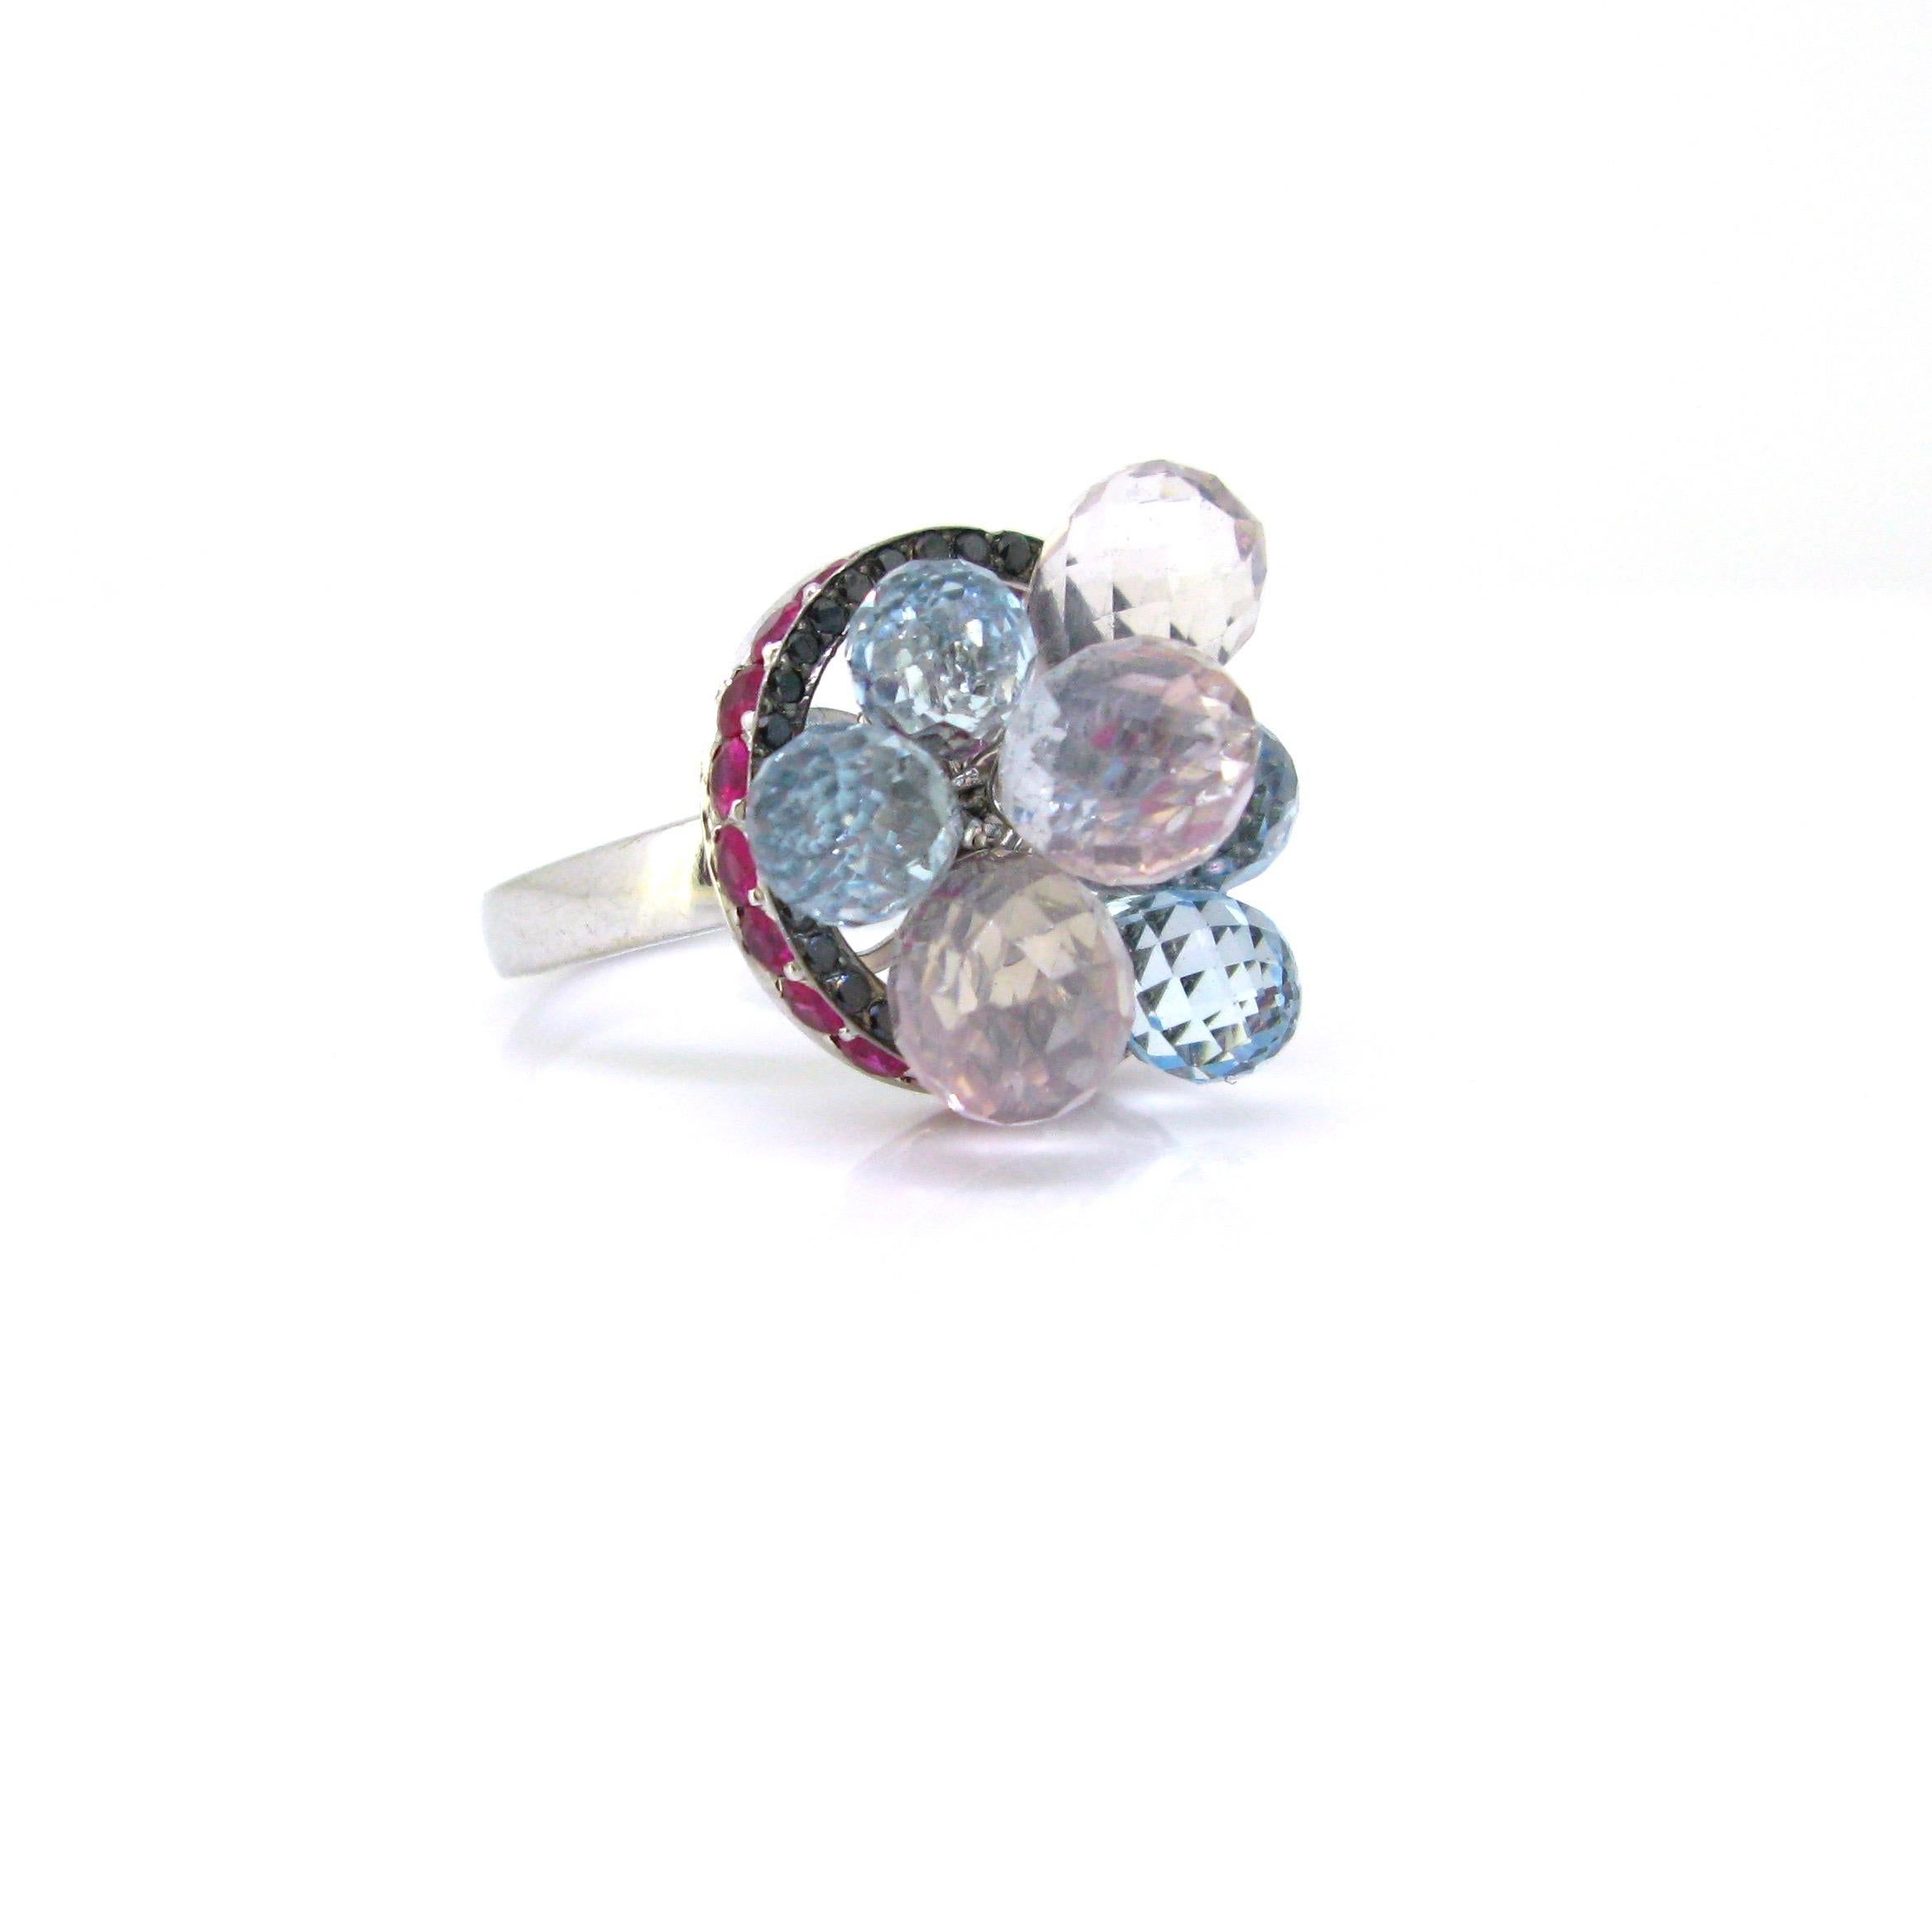 Weight:	15,26gr

Metal:	18kt white gold

Condition:	New

Stones:	3 Pink Quartz
	4 Aquamarines
•	Cut:	Briolette
	
Others:	21 round cut rubies
•	Total carat weight:	2ct approximately
	
	35 round cut black diamonds
•	Total carat weight:	0.30ct